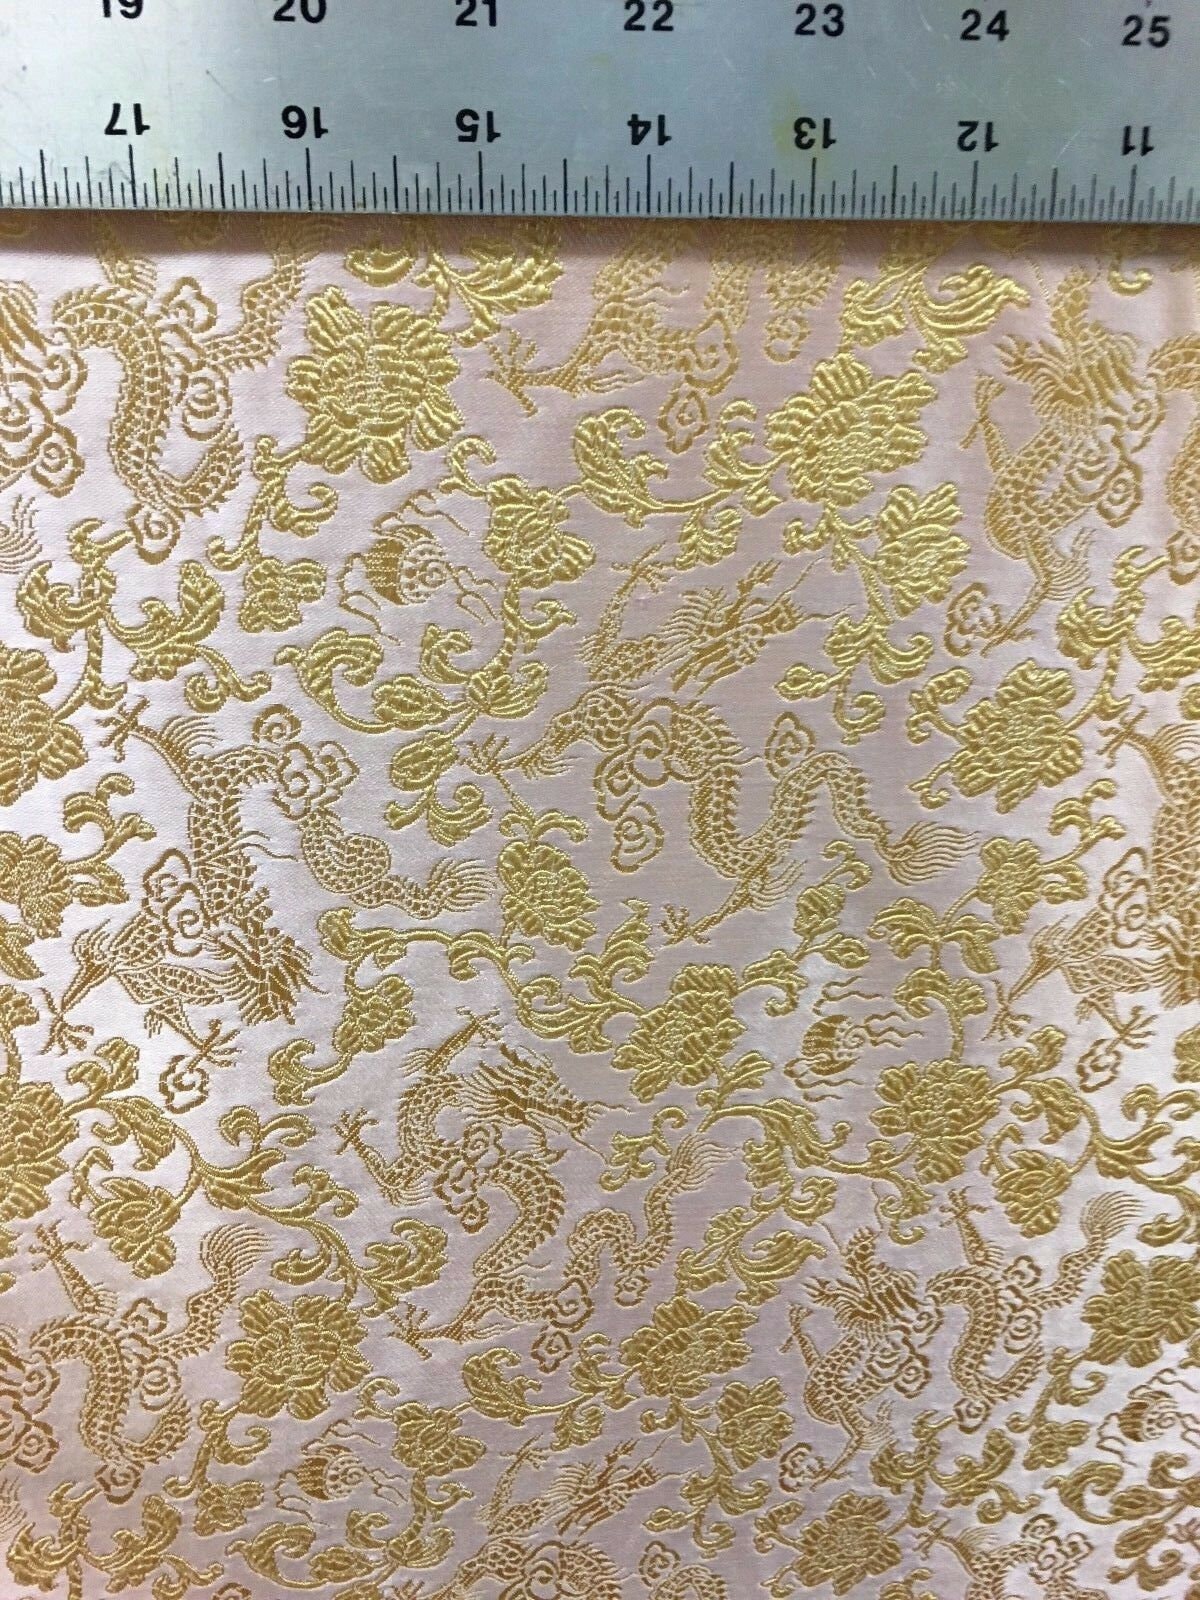 BLUSH GOLD Metallic Dragon Floral Brocade Fabric (54 in.) Sold By The Yard